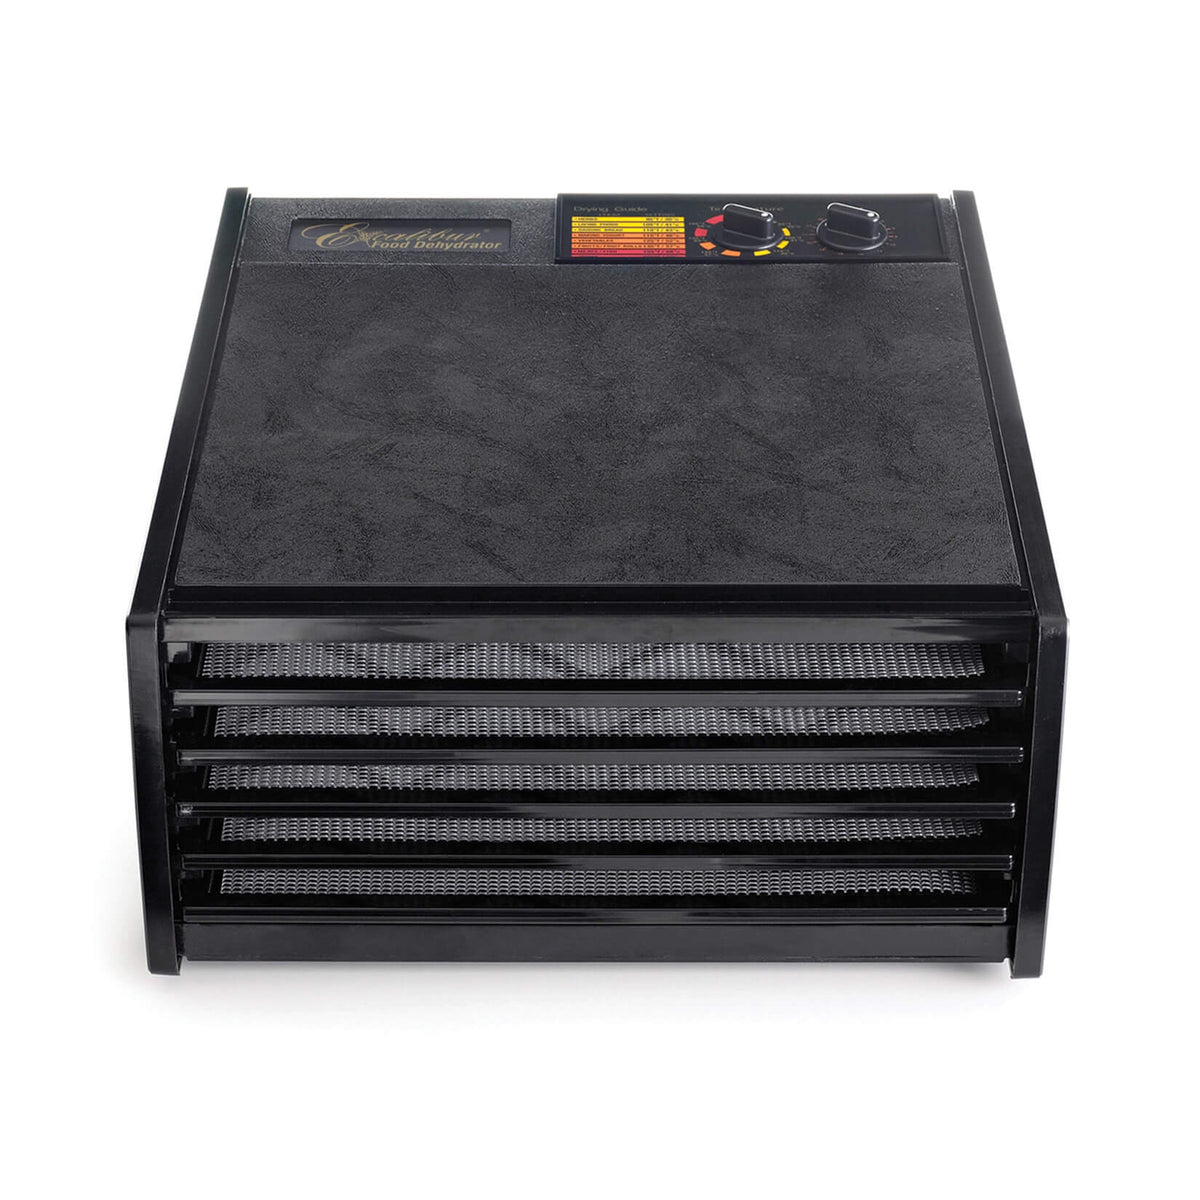 Excalibur 4526TB 5 tray dehydrator front view with trays in.